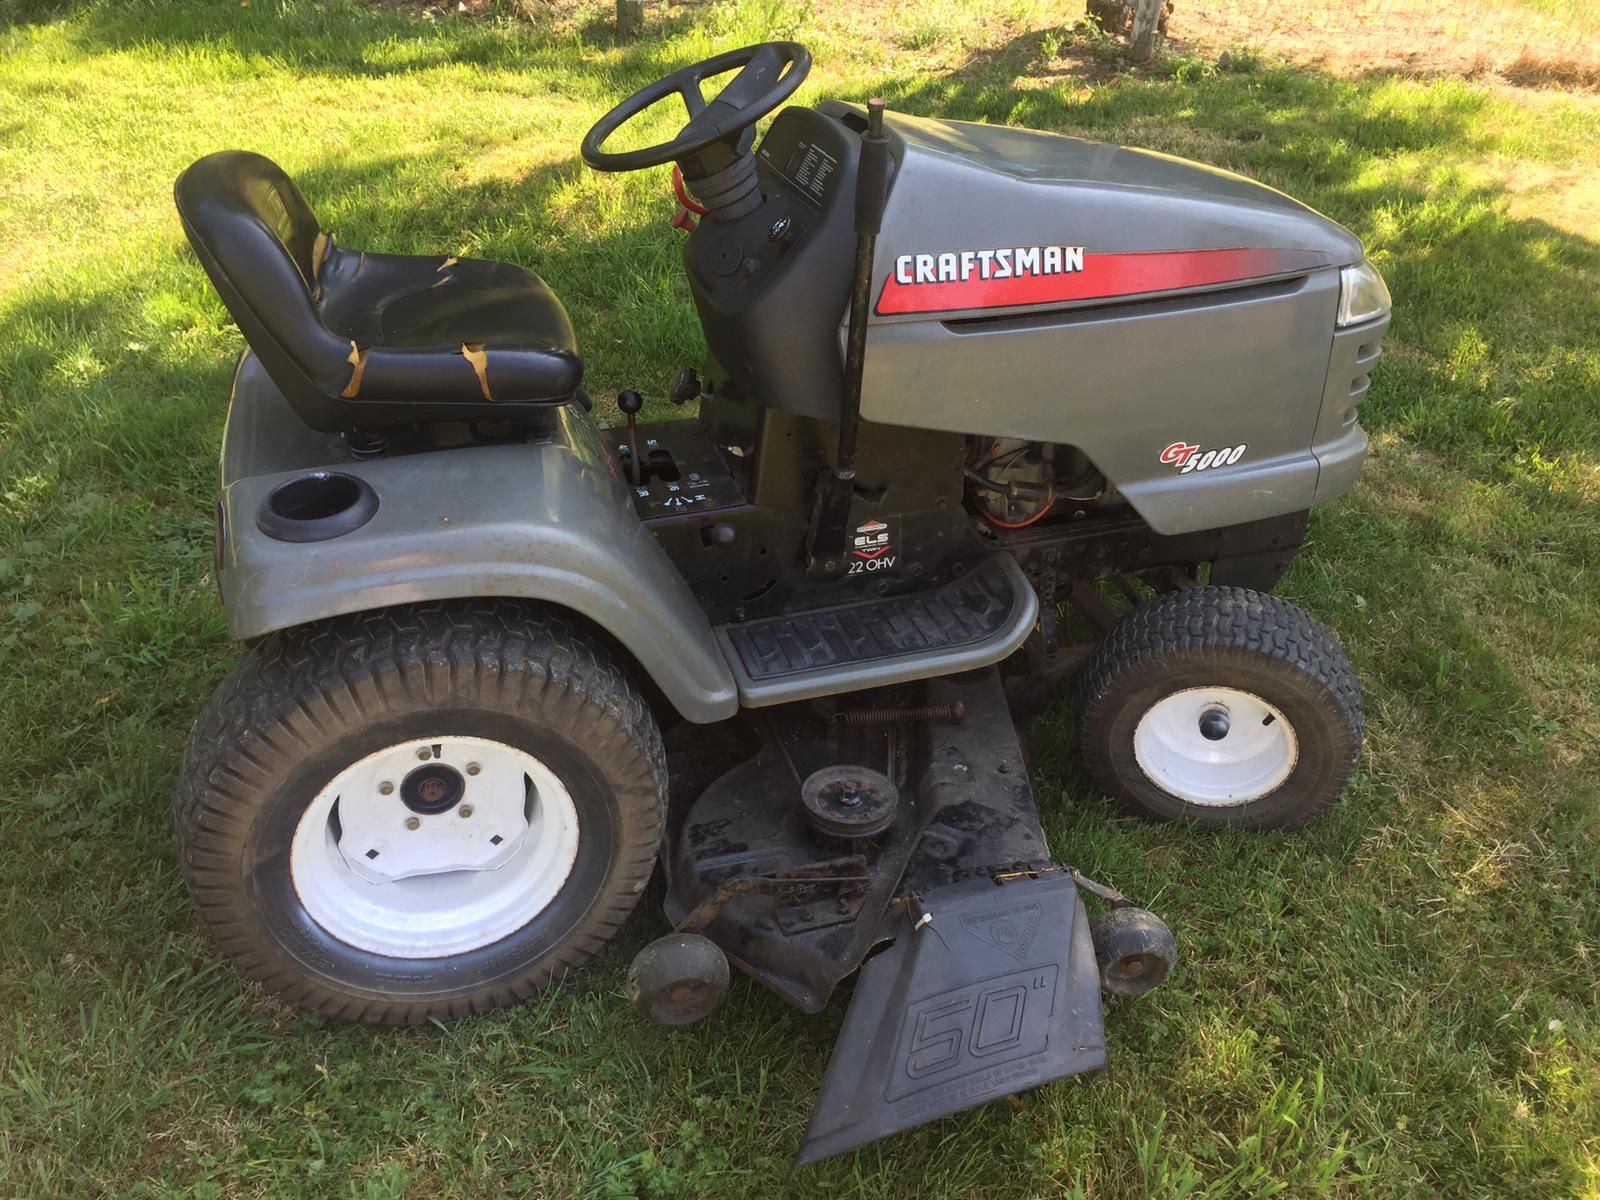 Craftsman riding lawnmower GT5000 with attachments